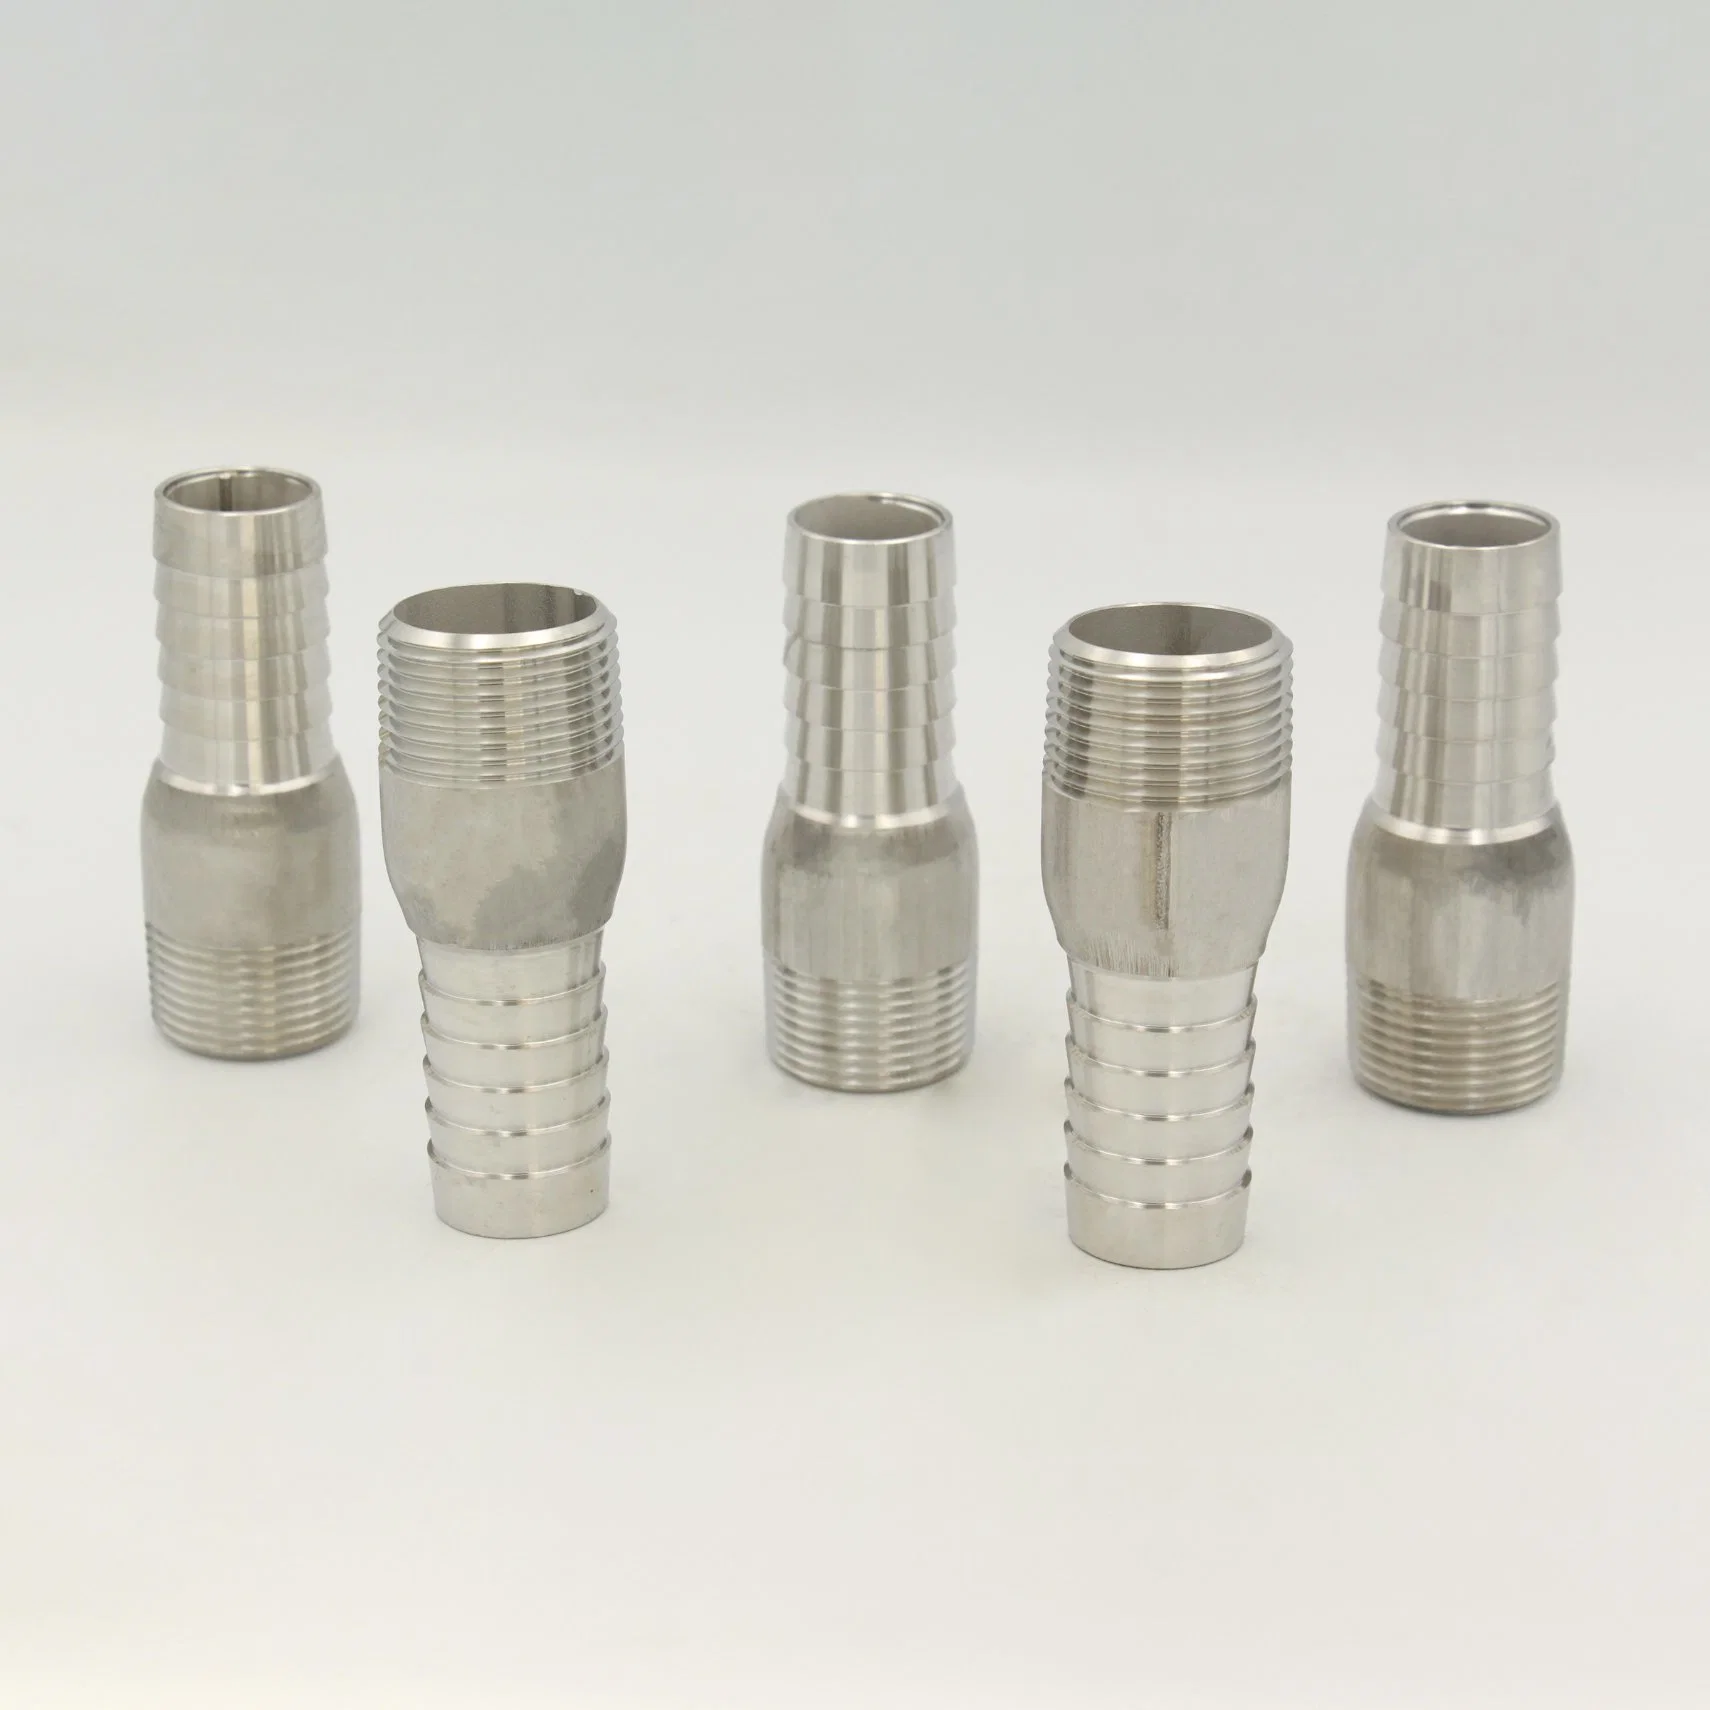 Stainless Steel High quality/High cost performance Hose Fitting King Nipple